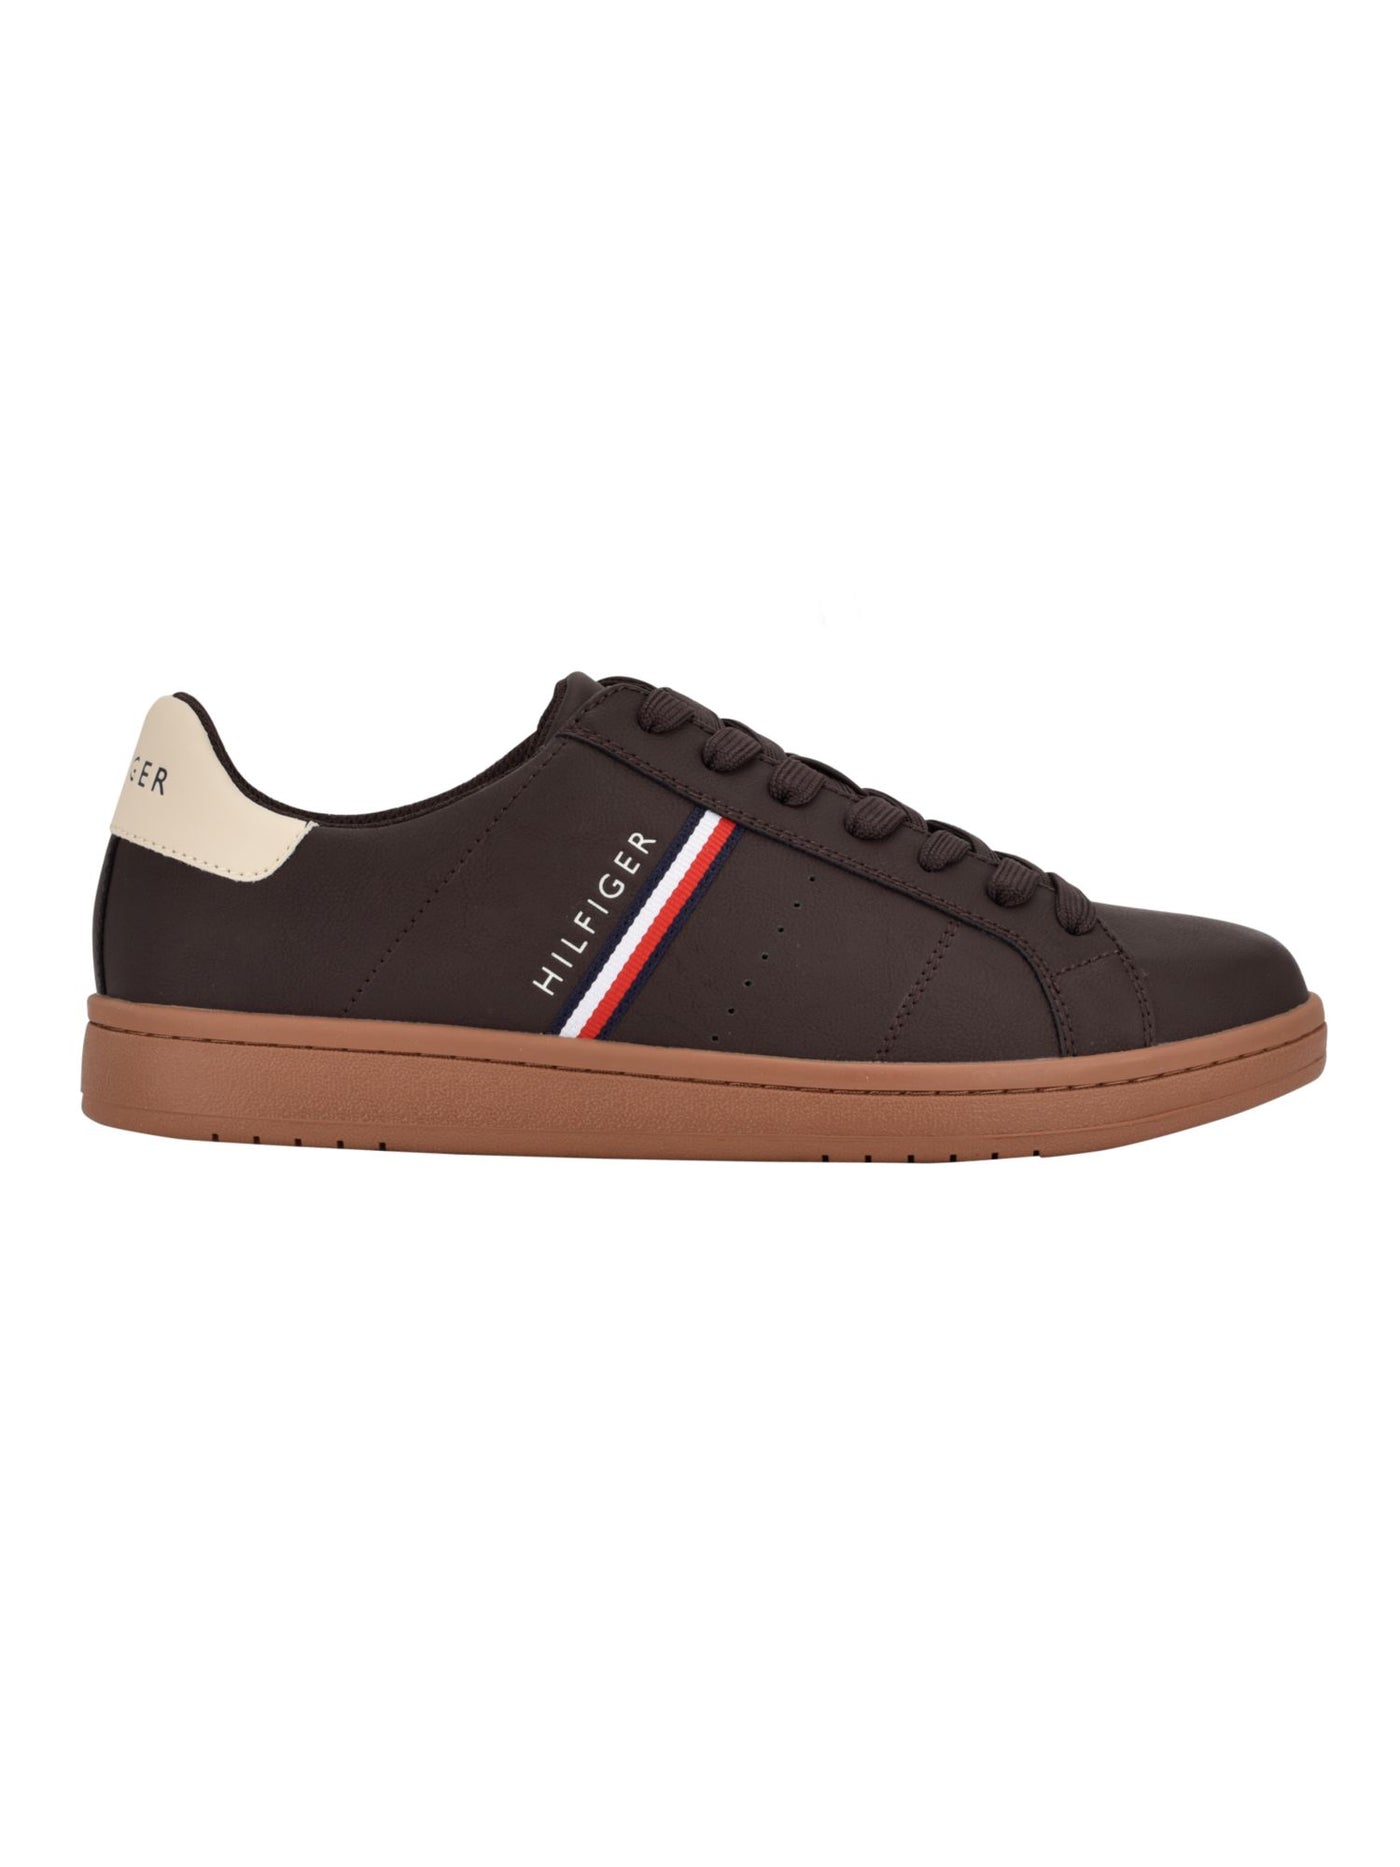 TOMMY HILFIGER Mens Brown Colorblocked Stripe Cushioned Lemmy Round Toe Platform Lace-Up Sneakers Shoes 8.5